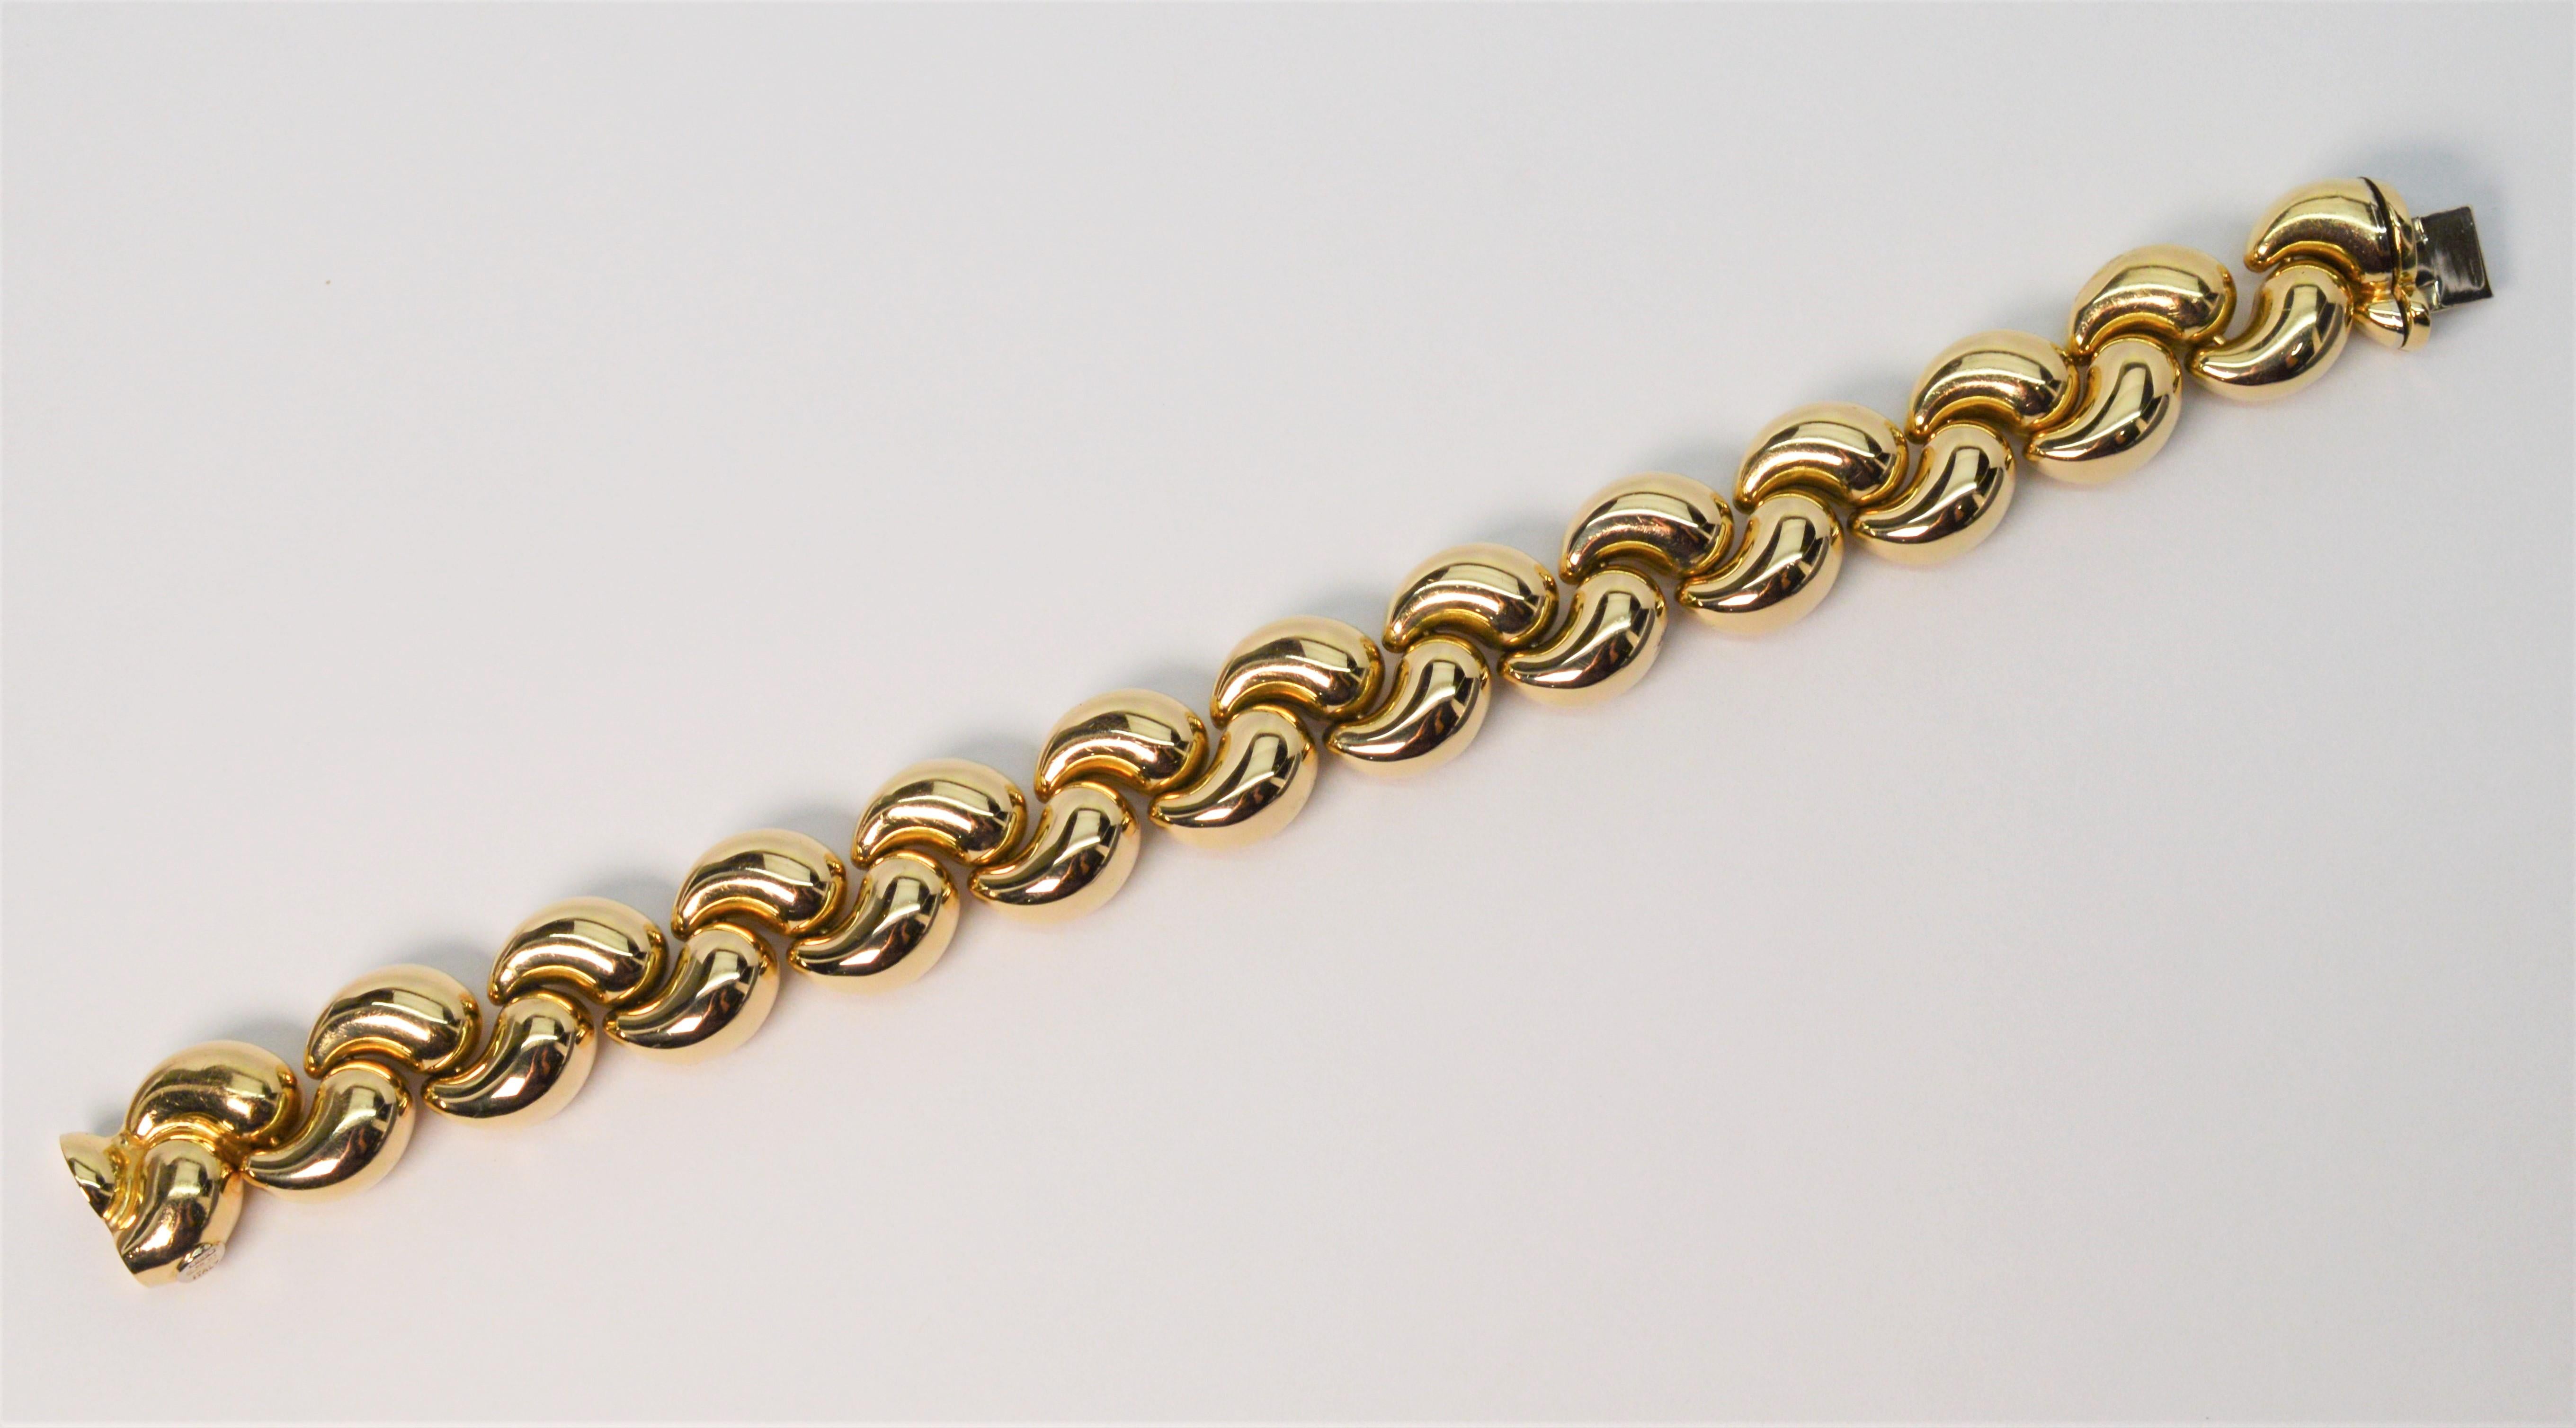 The many contours of this Italian made stylish bracelet evoke feminine elegance in fourteen karat 14K yellow gold. Interlocking hollow gold links give an infinite look to this elegant highly polished statement piece.  With a contemporary weave